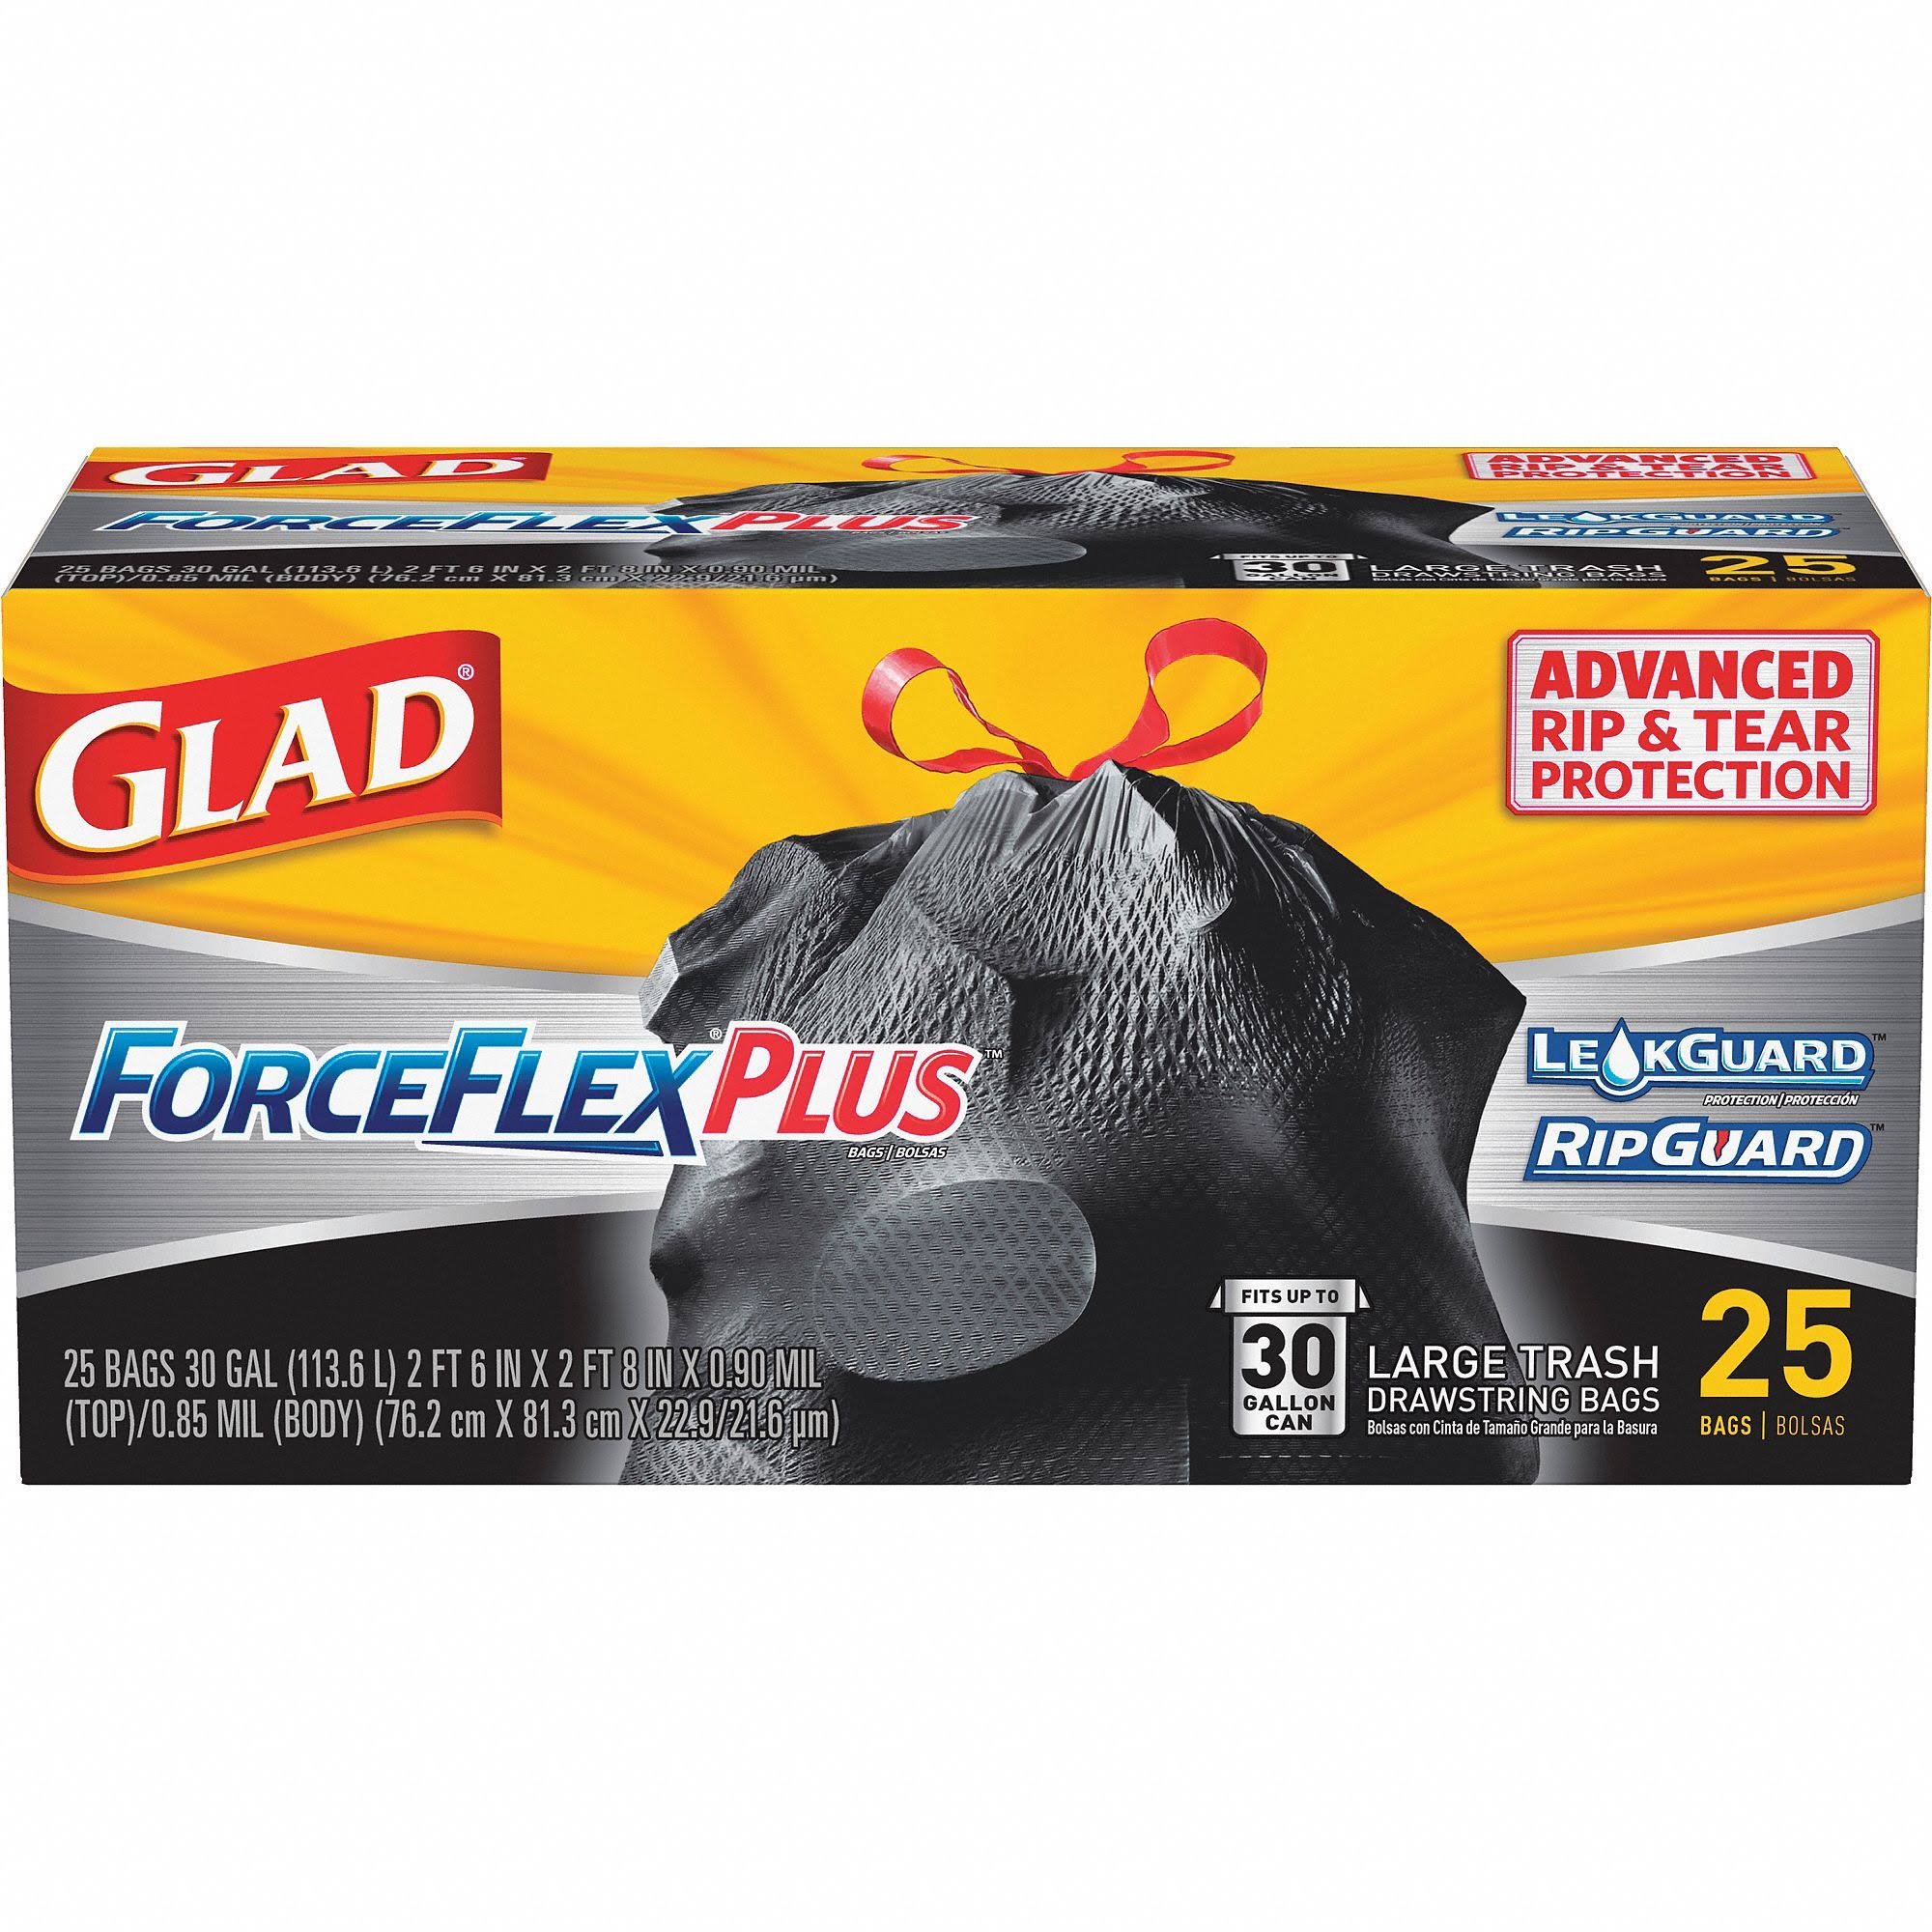 Glad ForceFlex Extra Strong Drawstring Trash Bags - 30 Gallon, Large